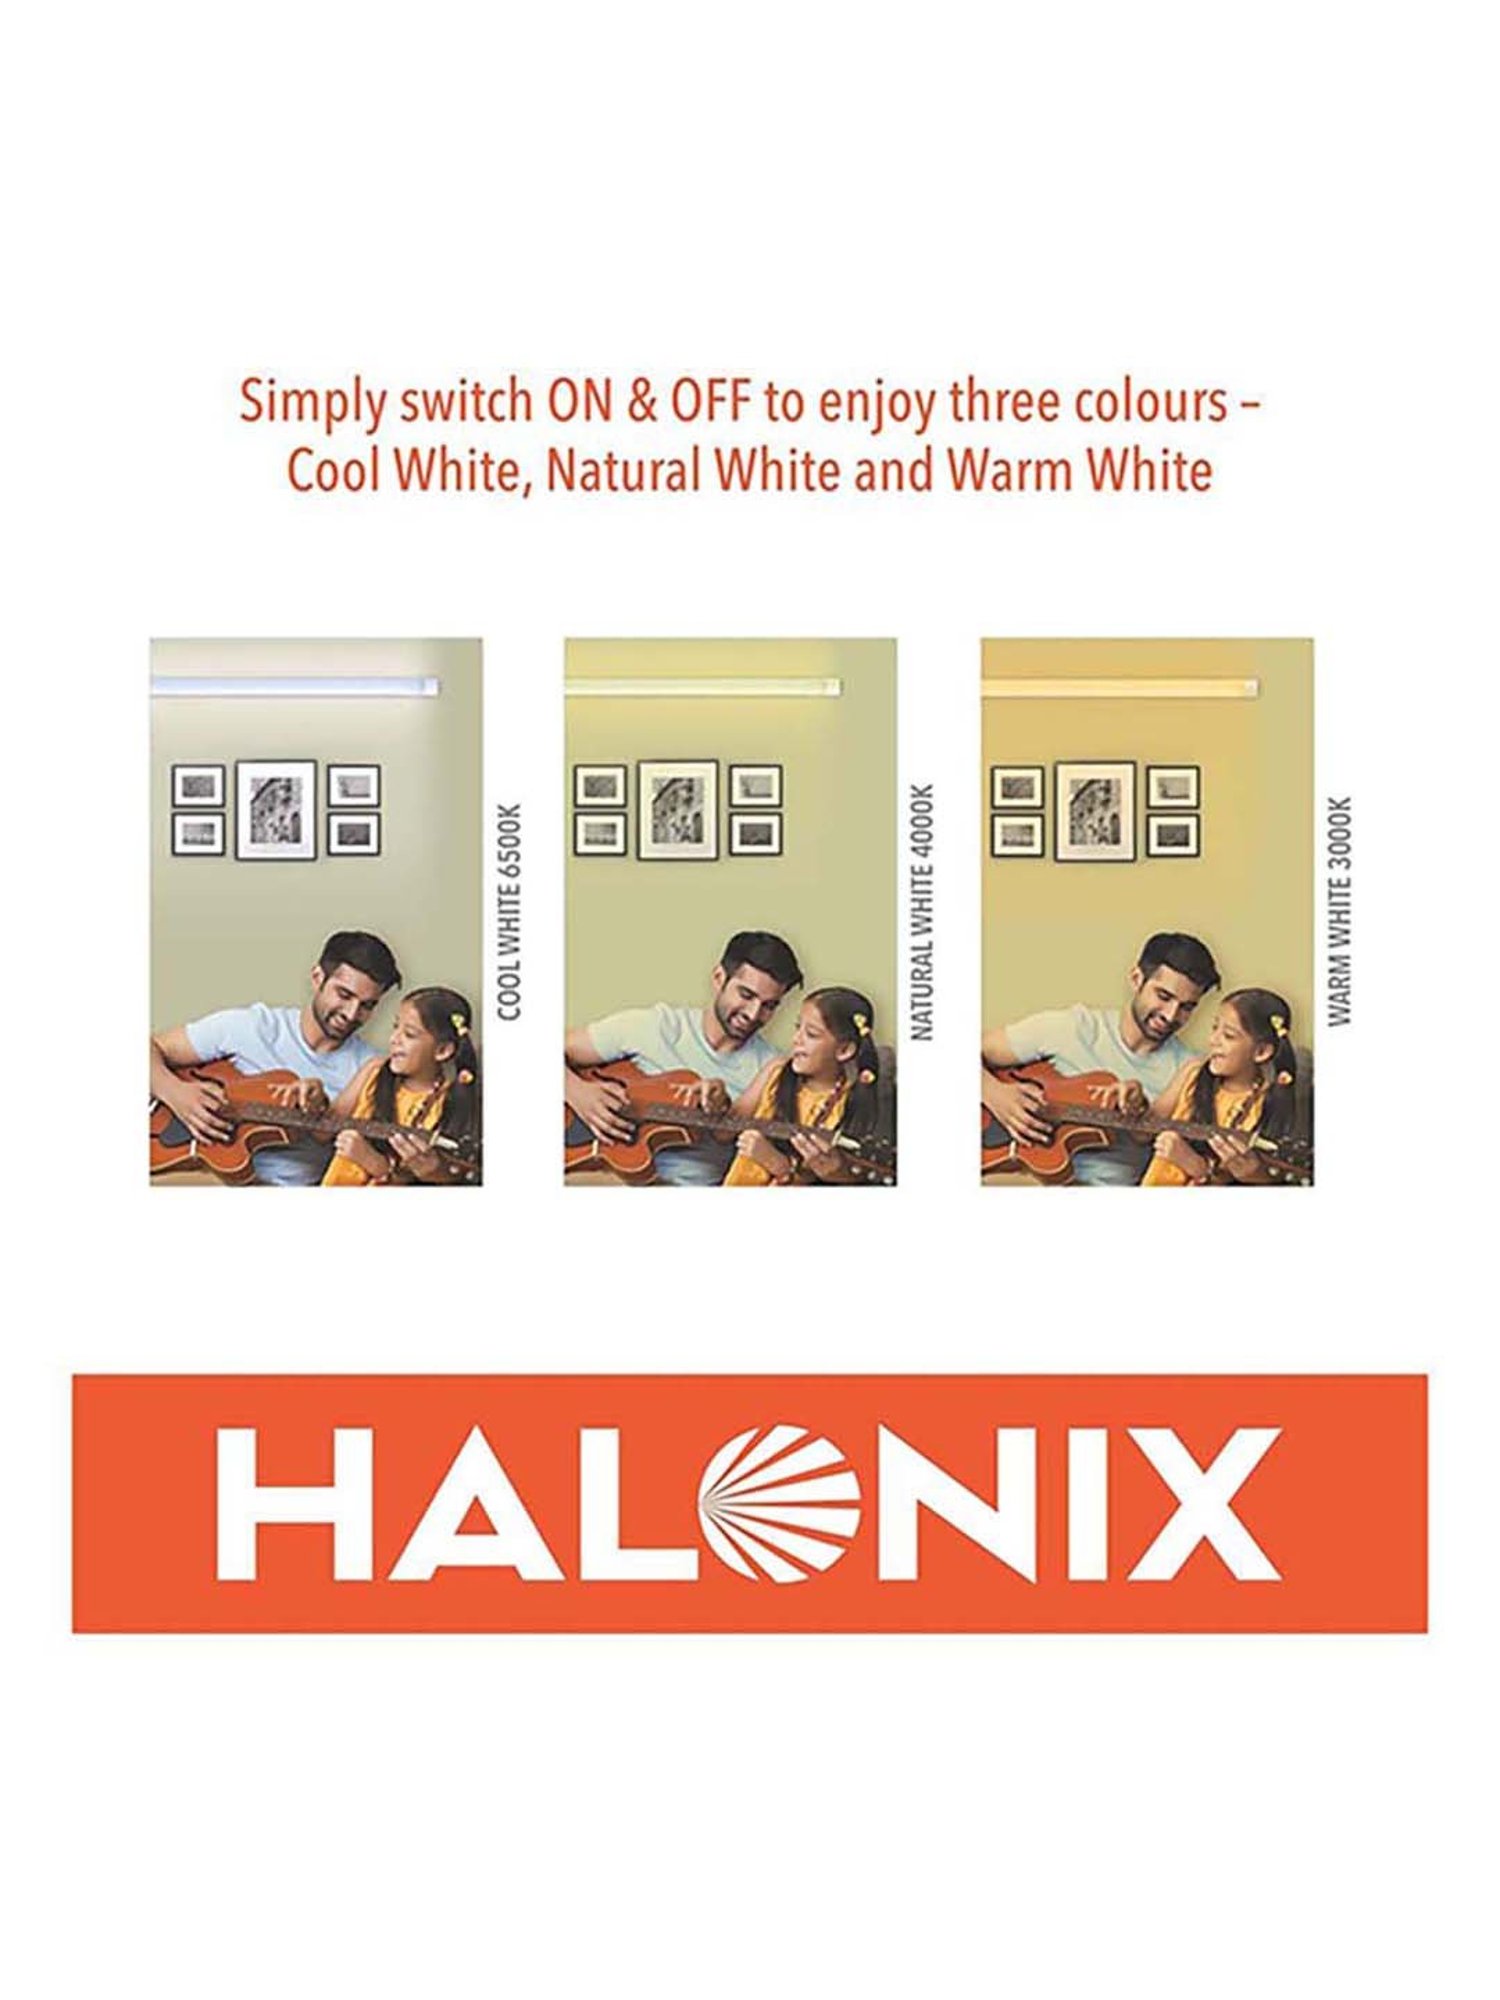 Halonix makes Indian streets safer through outdoor initiative | Advertising  | Campaign India